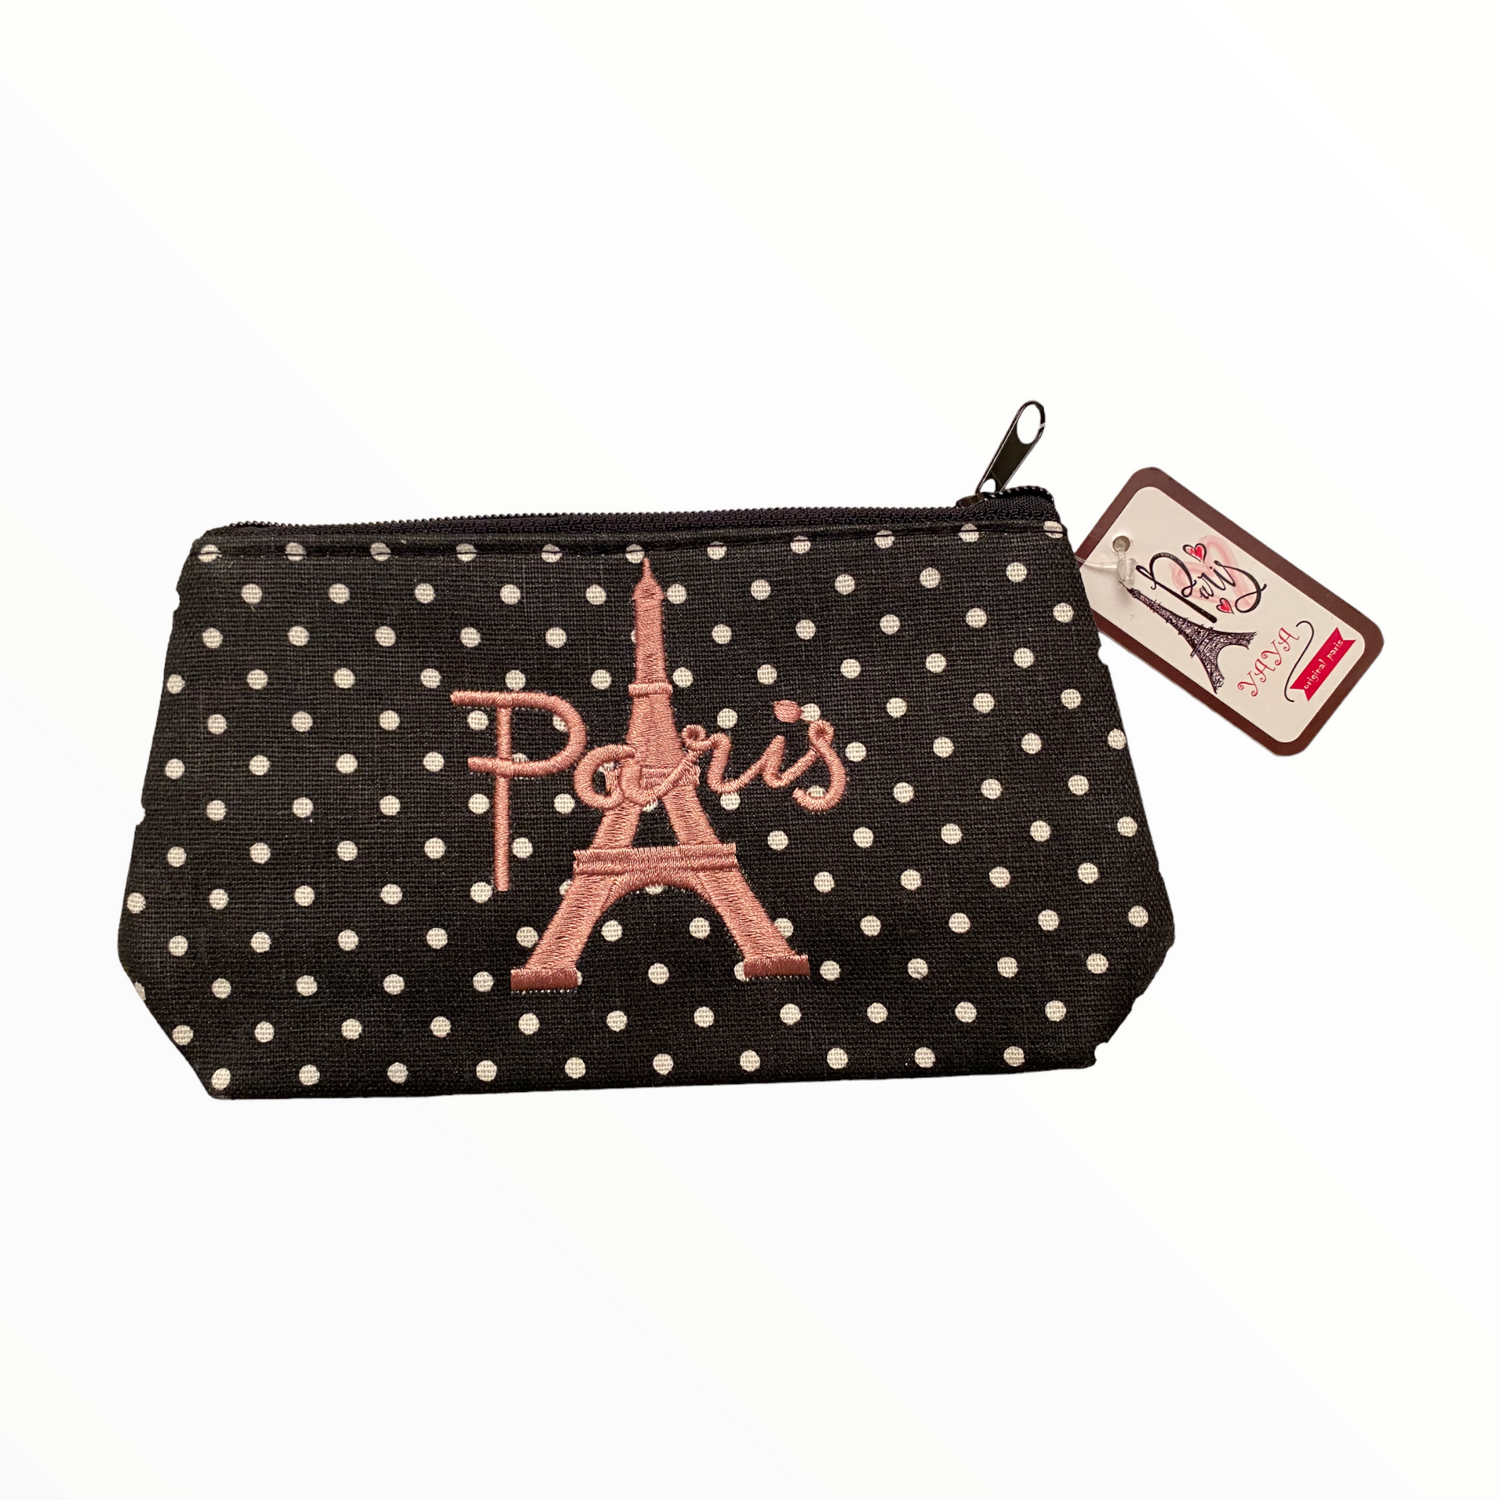 Small Black Clutch Bags with Zipper – Independent Reign